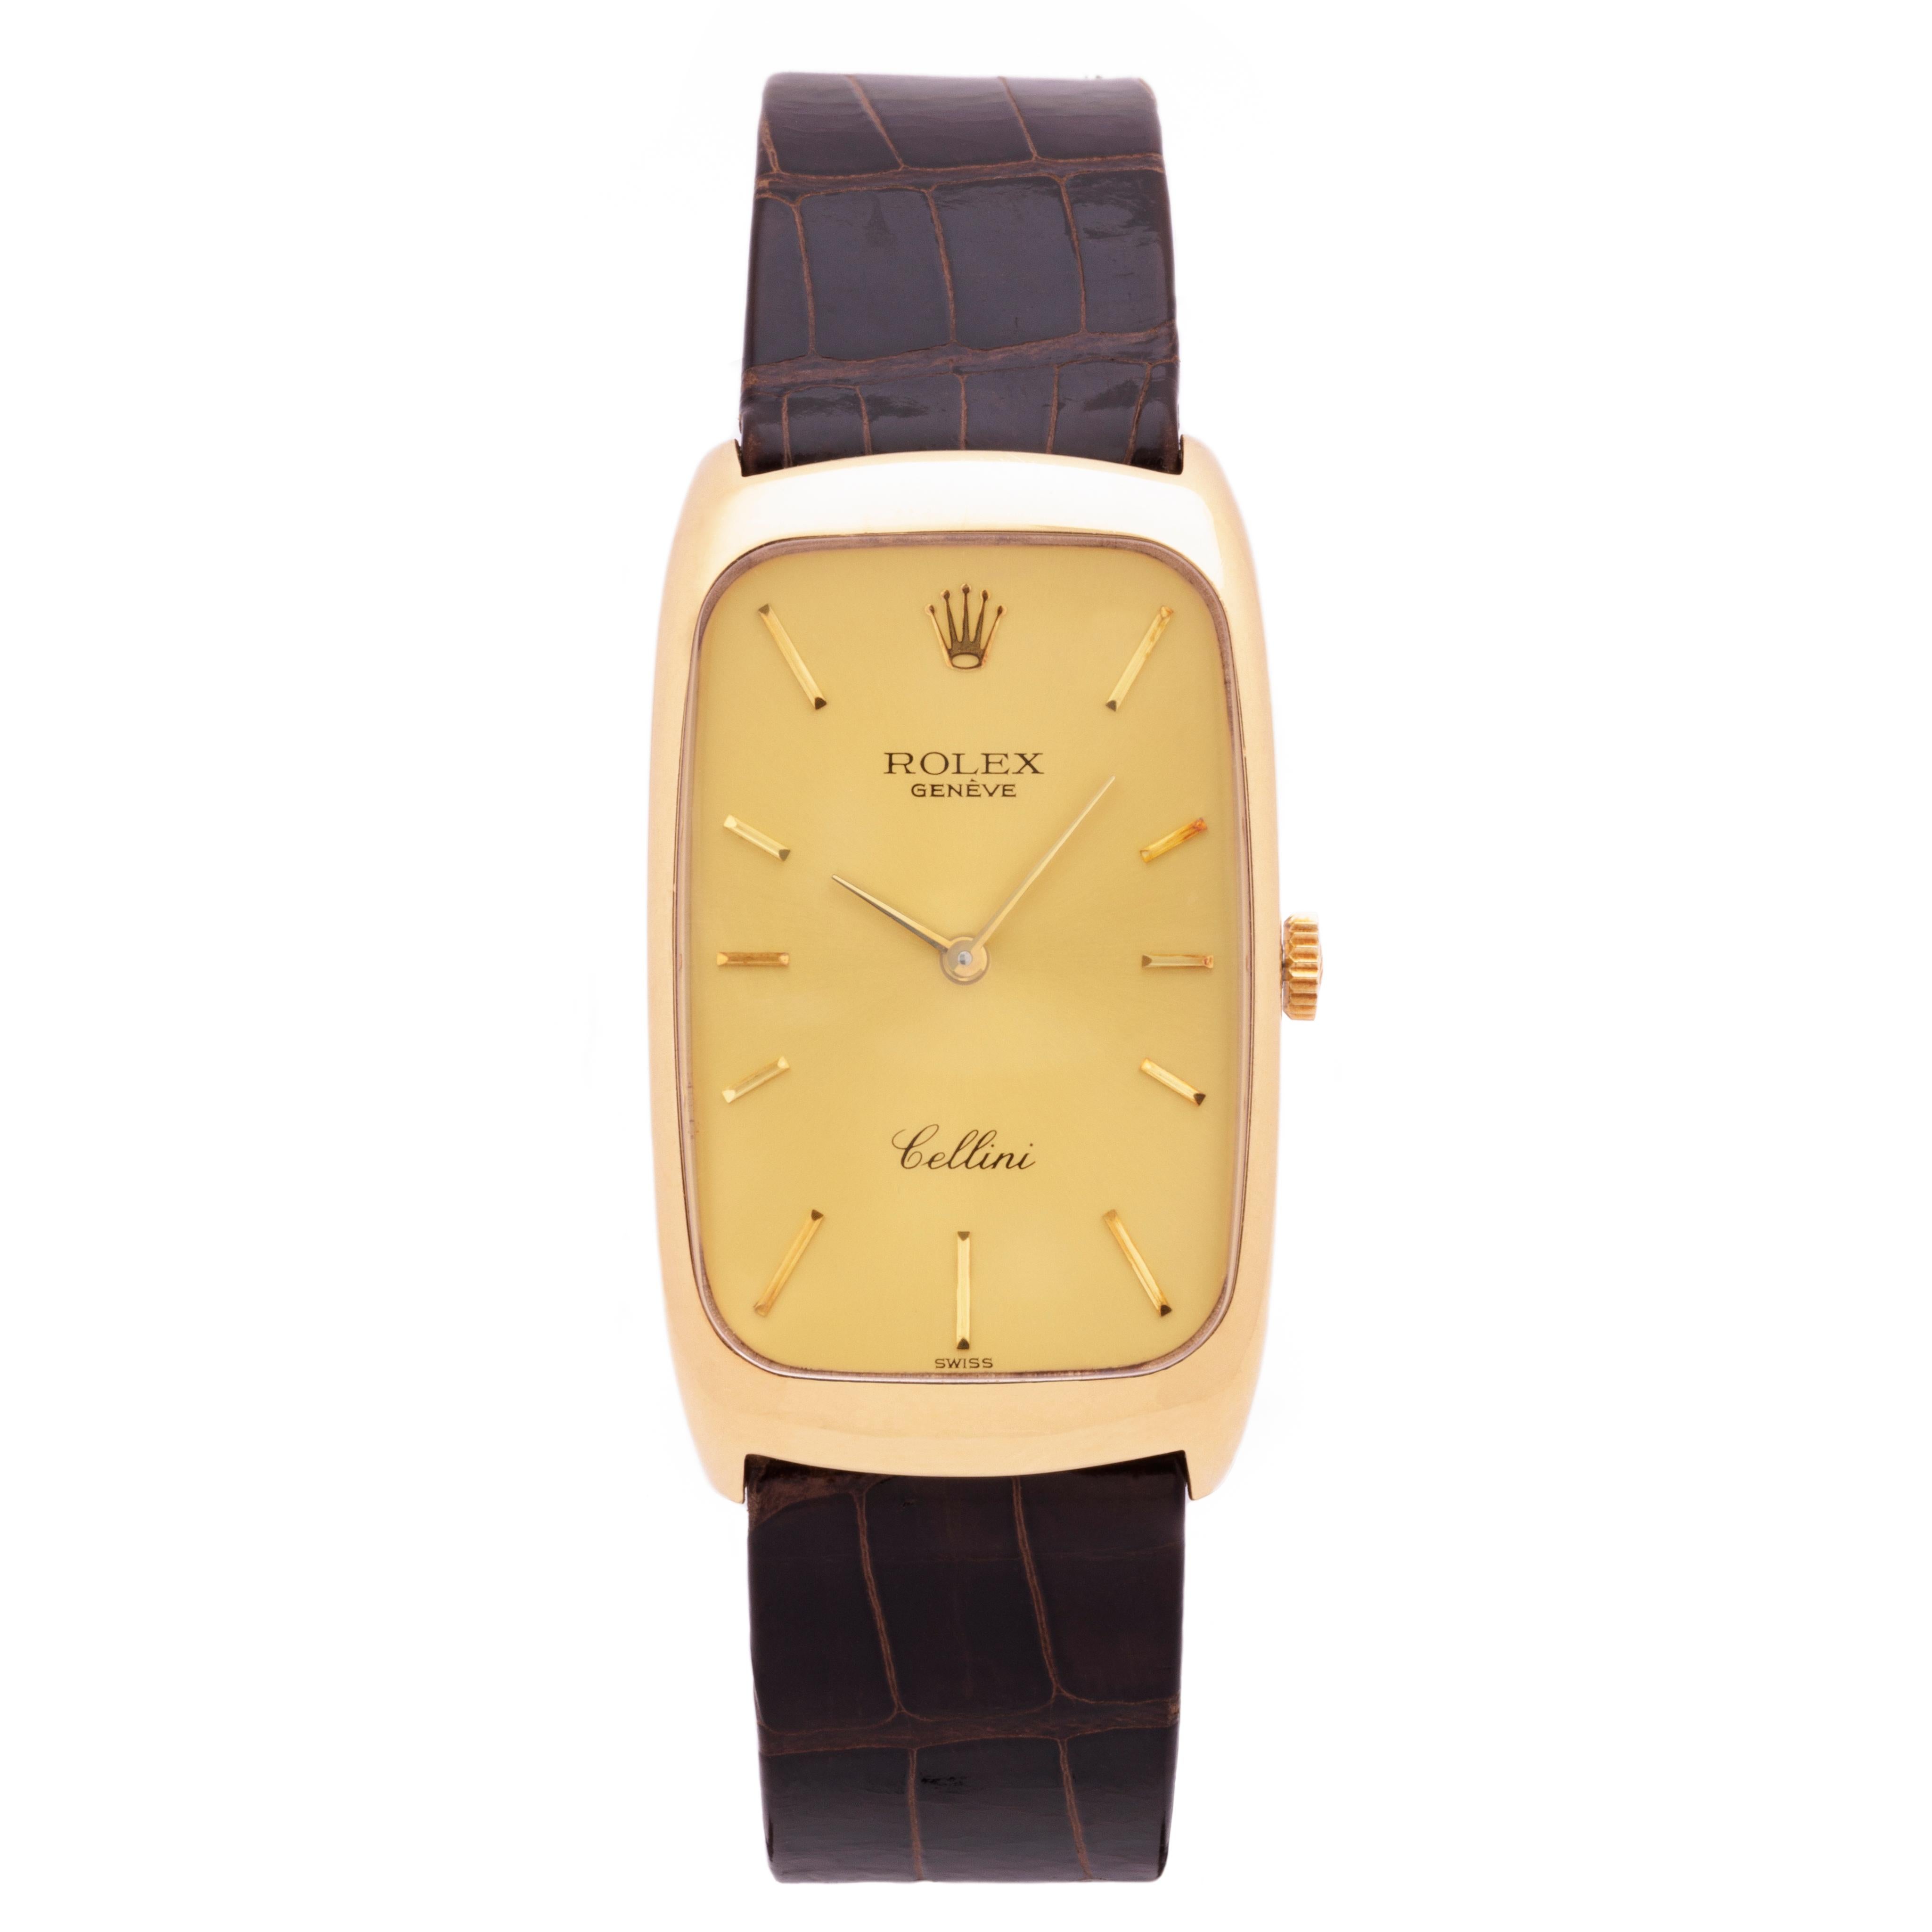 Vintage Rolex Cellini 
18k Yellow Gold 
Model 4108 
Serial 4320XXX 
Manual Wind 
Chocolate Brown Rolex Strap
c.1976
Made in Switzerland

To borrow a line from the 2010 David Fincher film The
Social Network: Fashion is never finished. It is
endlessly